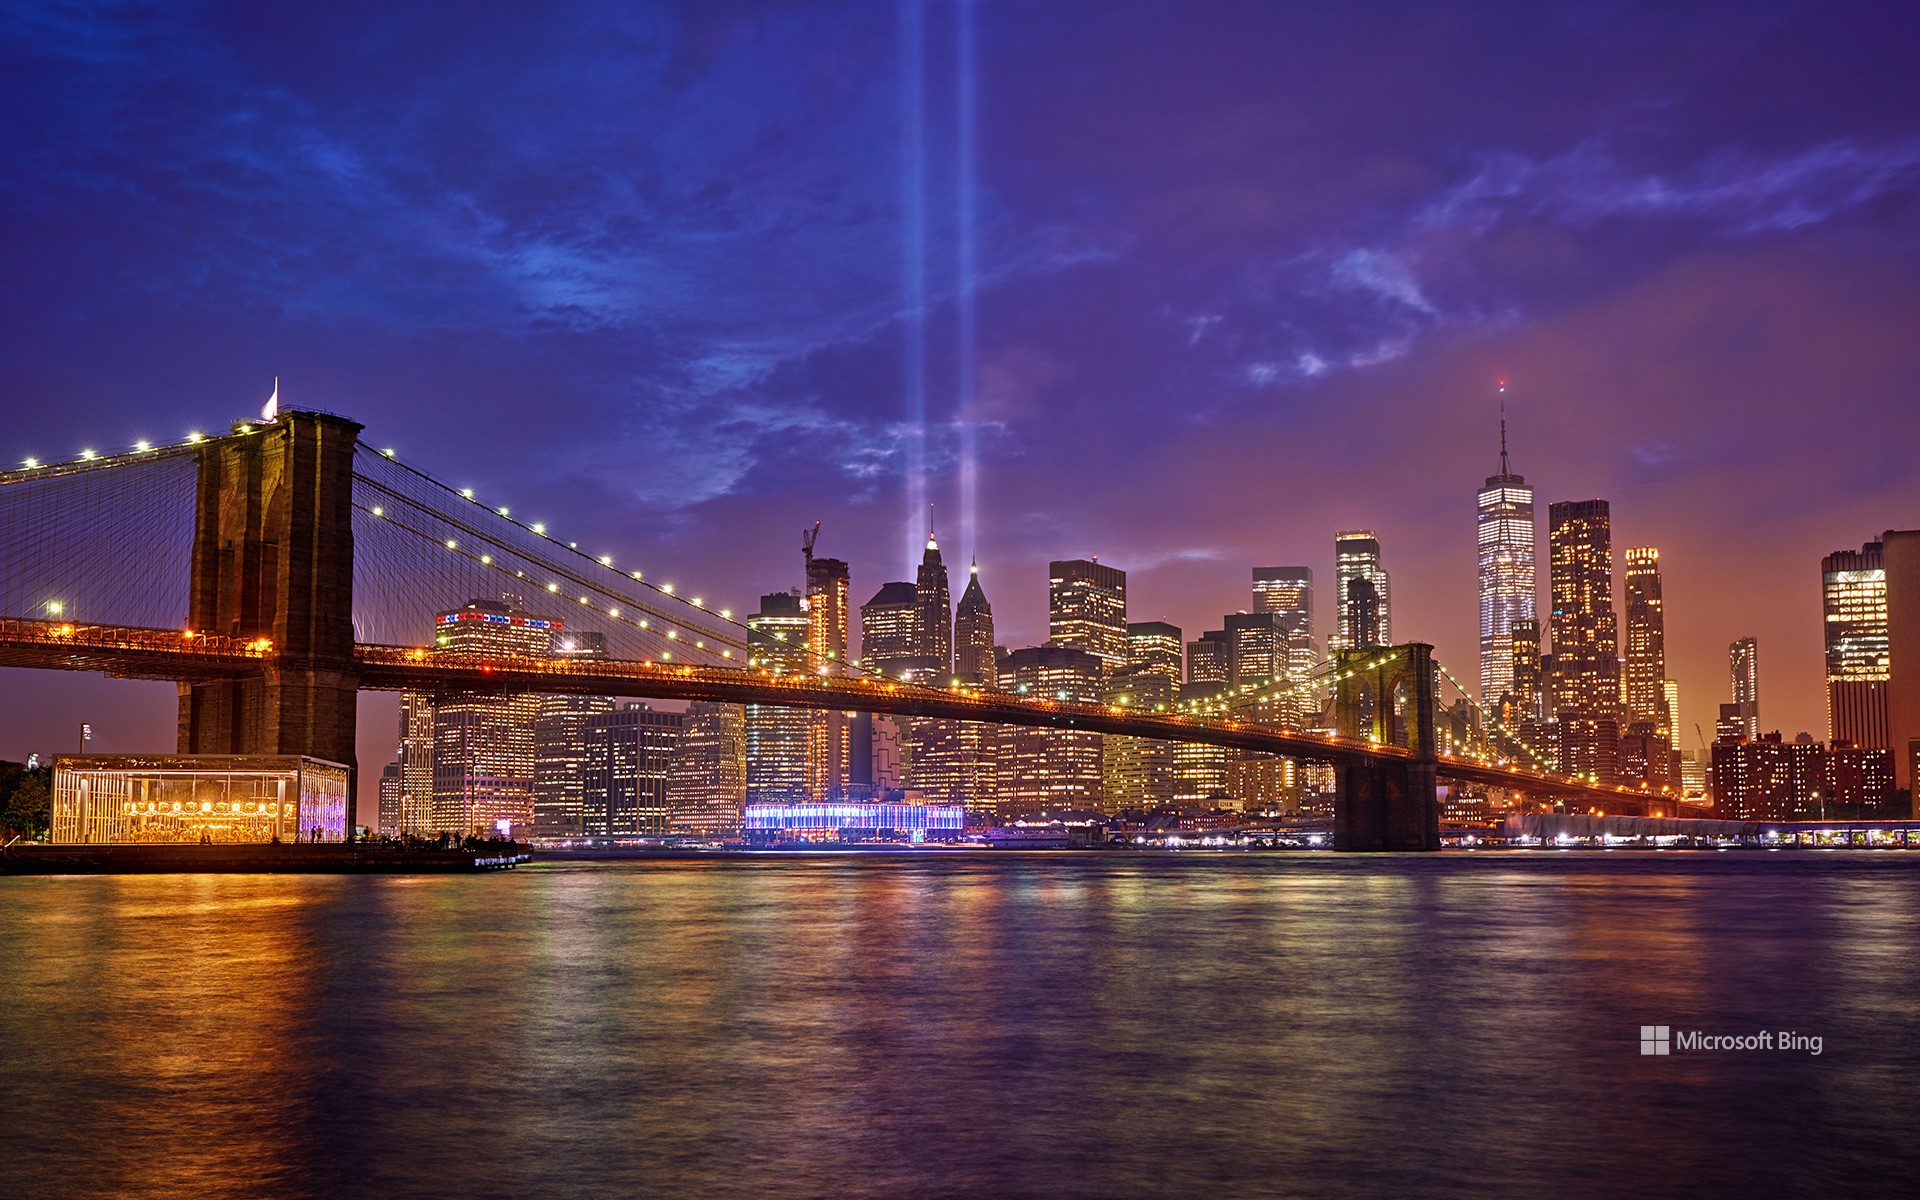 Brooklyn Bridge with the 'Tribute in Light' installation for 9/11, New York